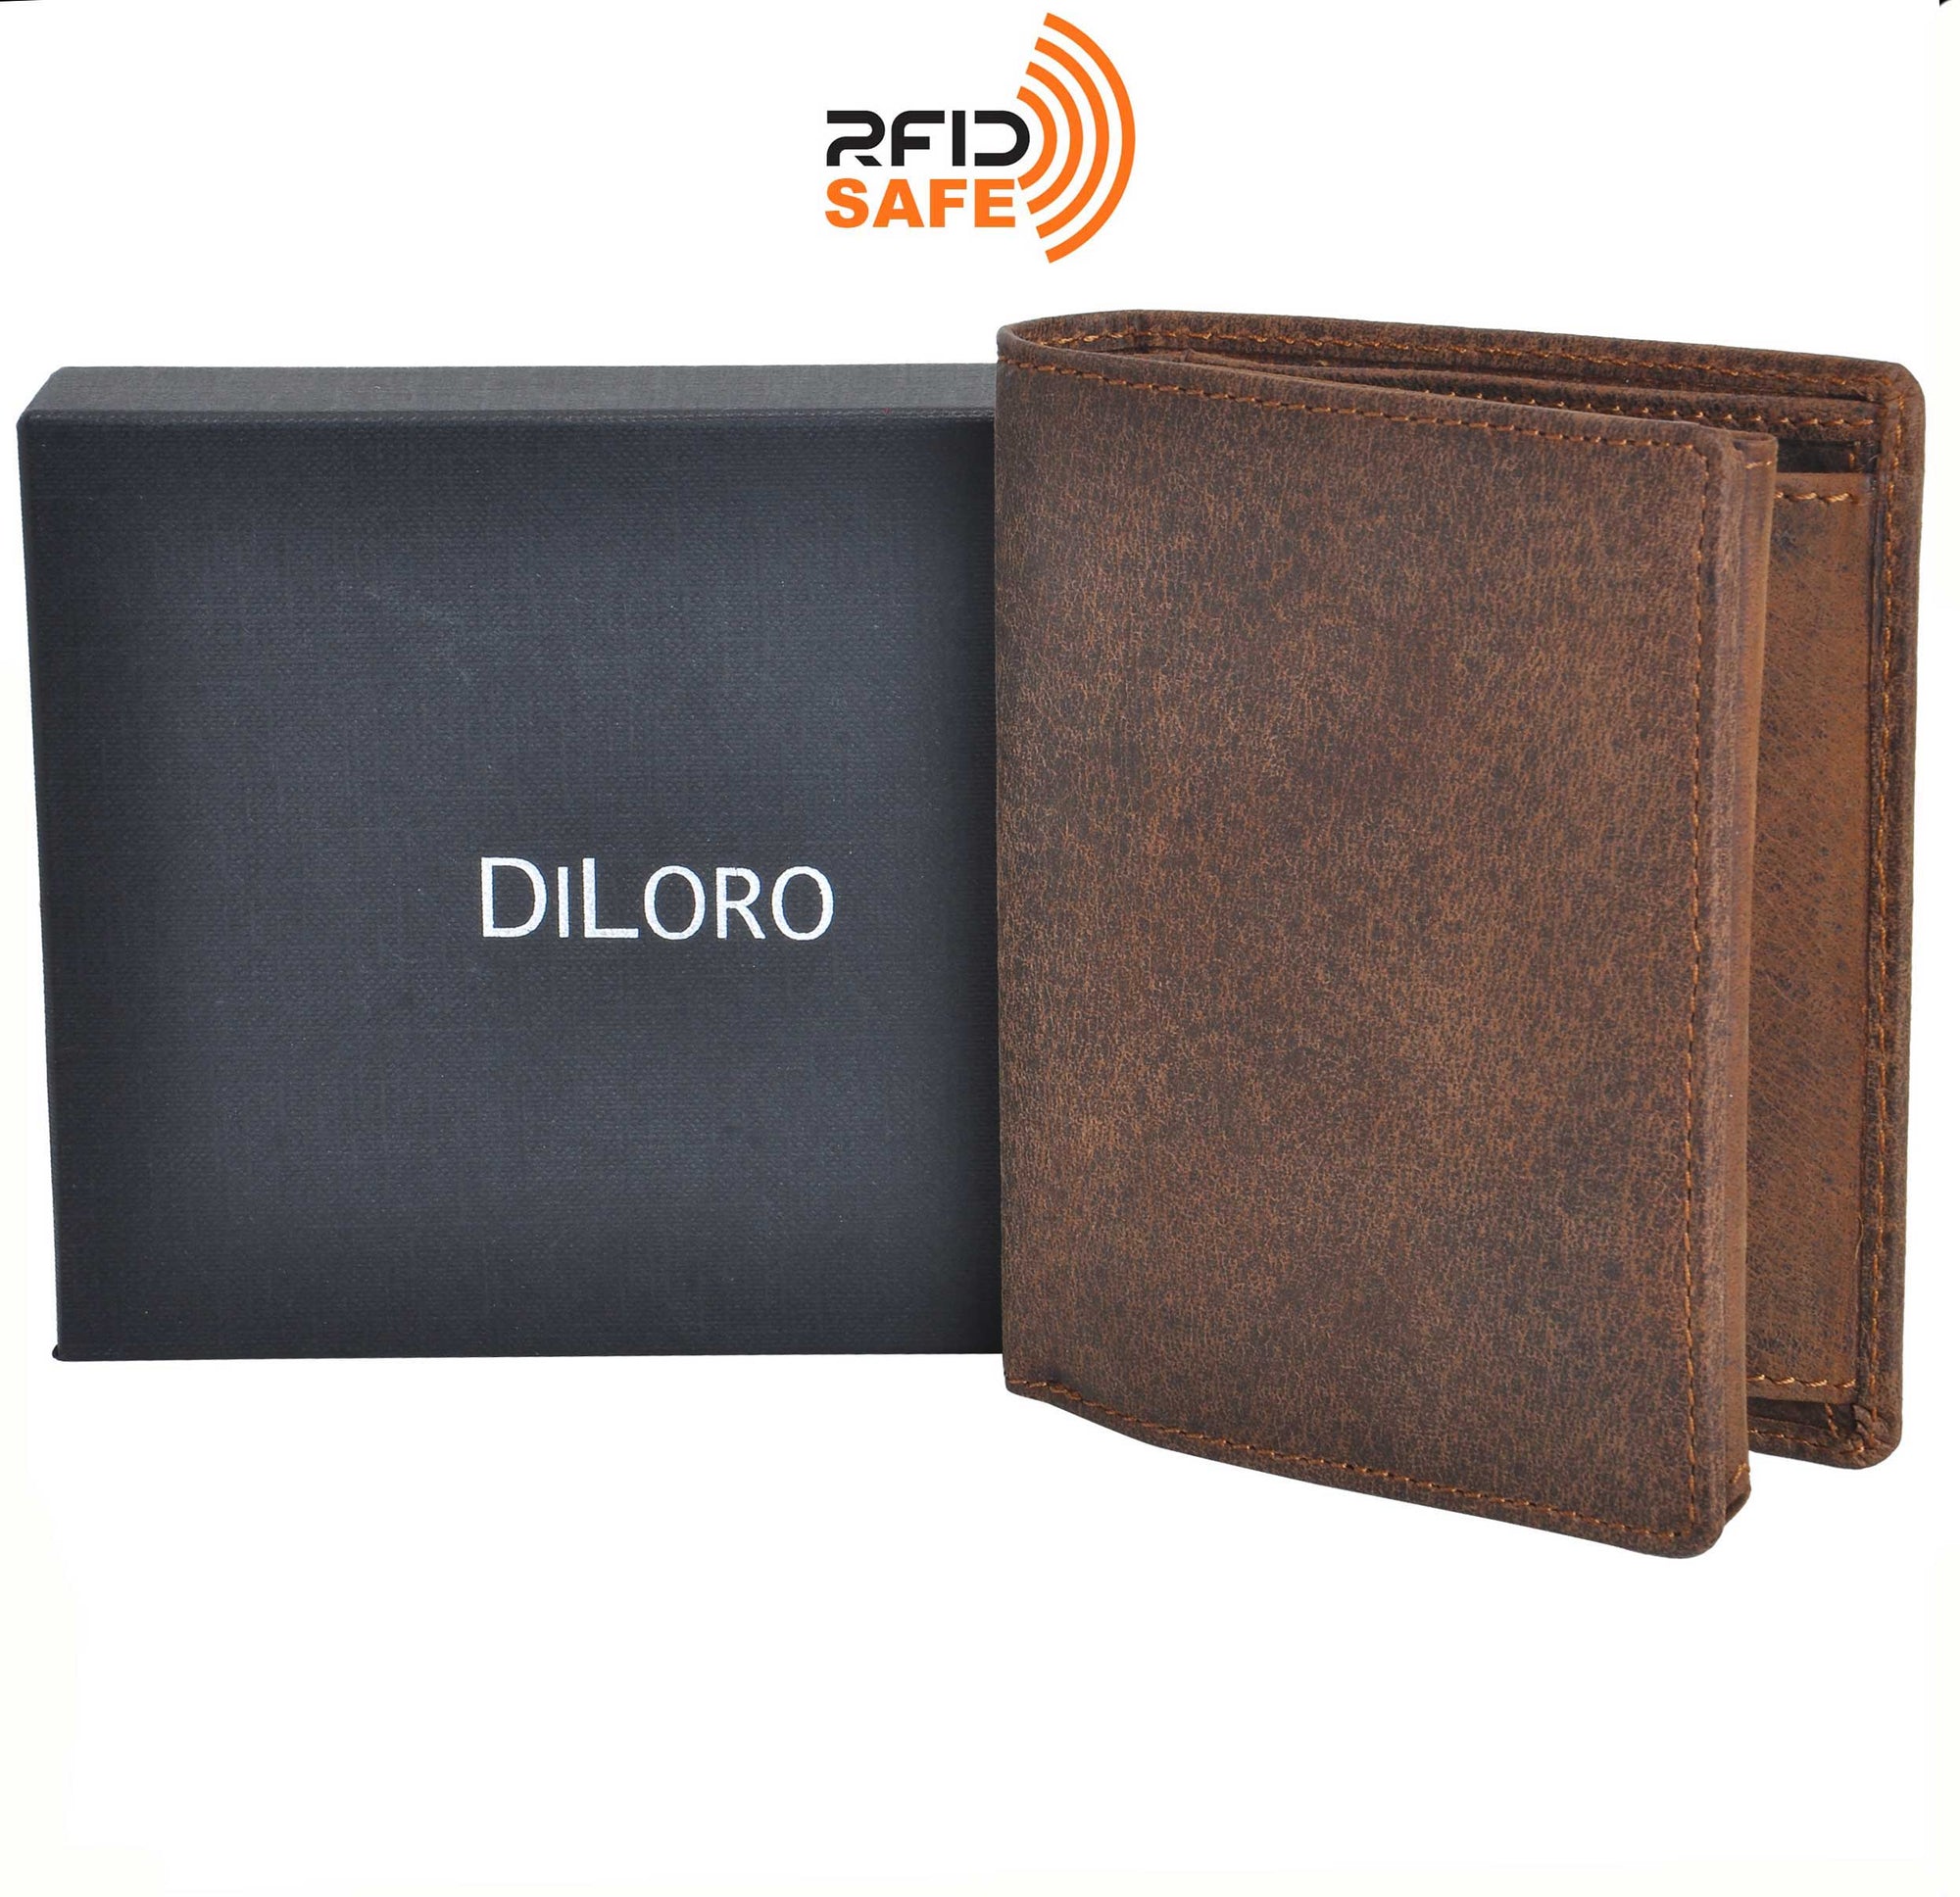 DiLoro Men's Vertical Leather Bifold Flip ID Zip Coin Wallet RFID Save in Dark Hunter Brown with DiLoro Gift Box and RFID Logo